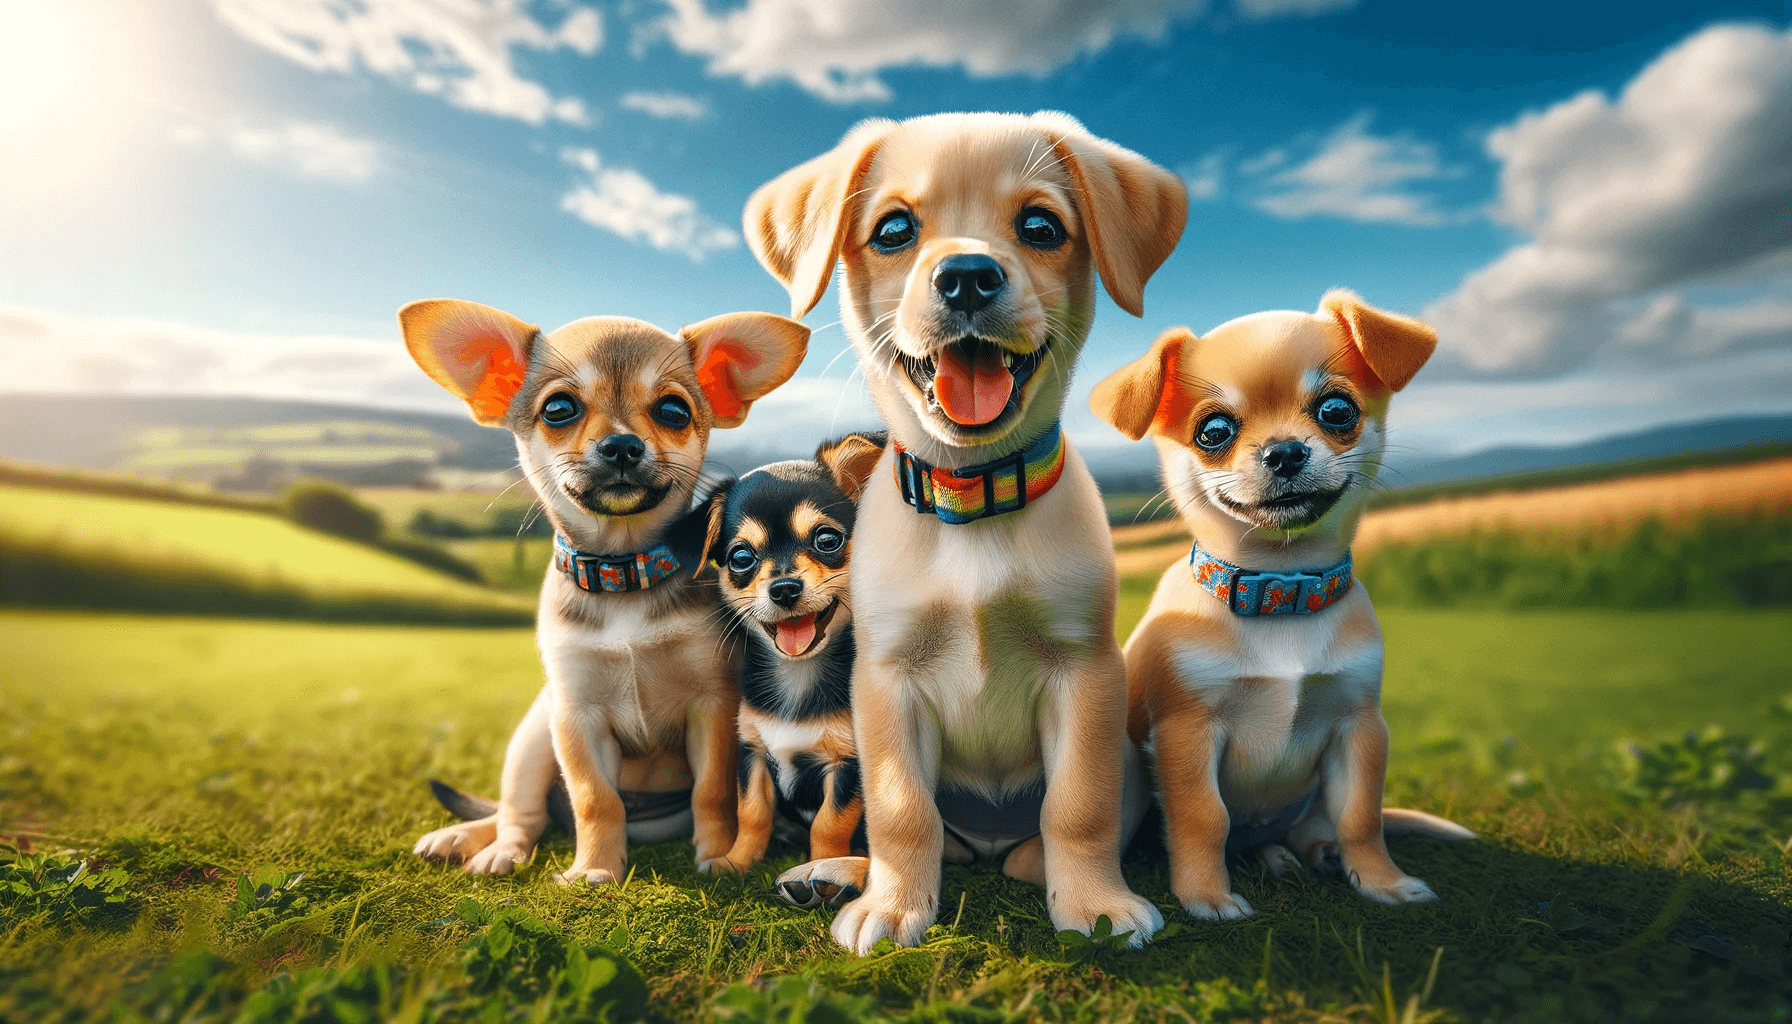 Labrahuahua puppies sitting together on a lush green field under a clear blue sky